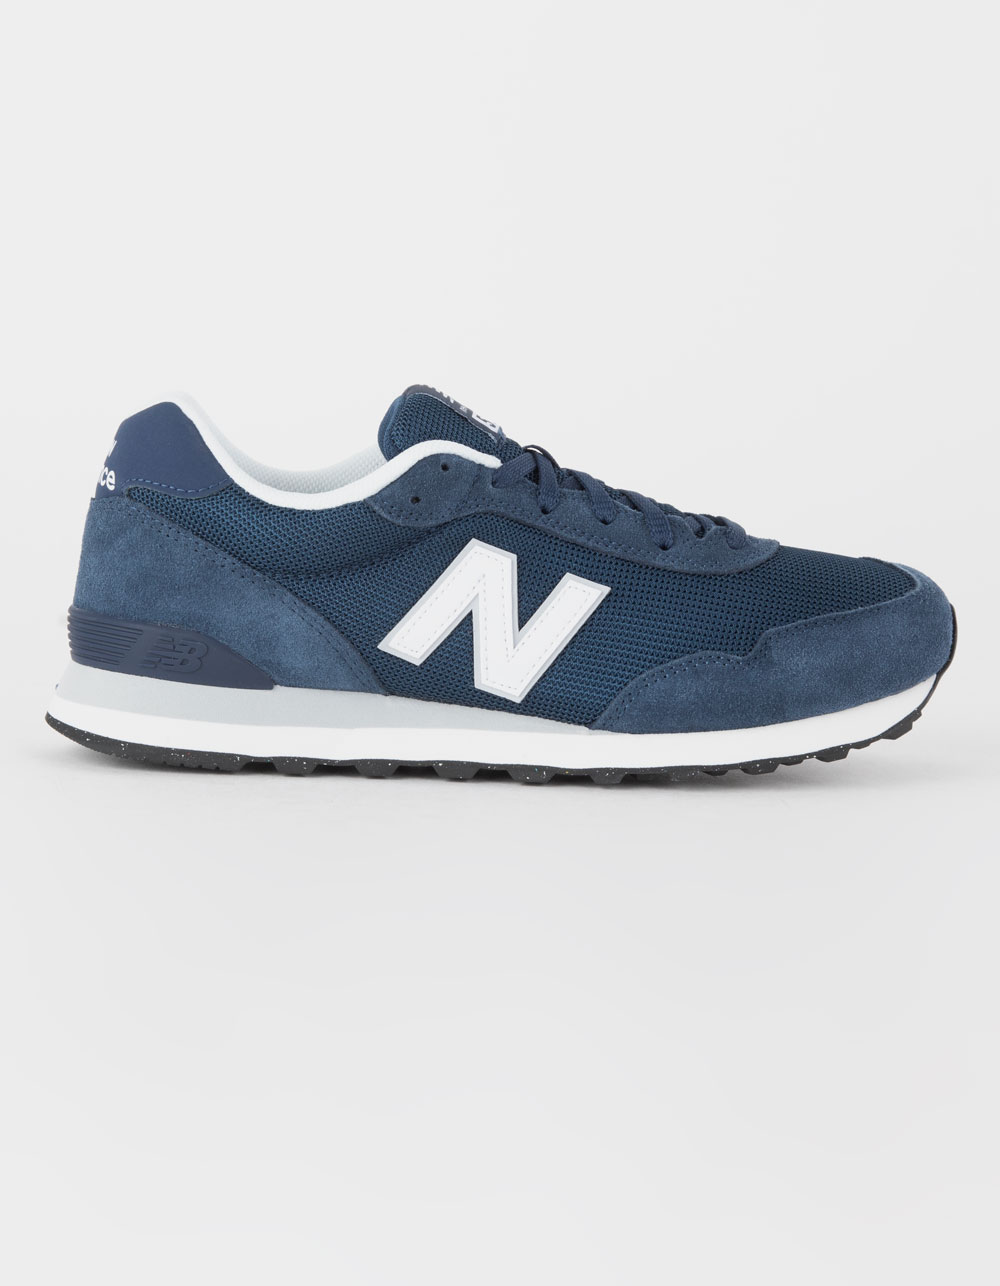 NEW BALANCE 515 Mens Shoes - NAVY/WHITE | Tillys